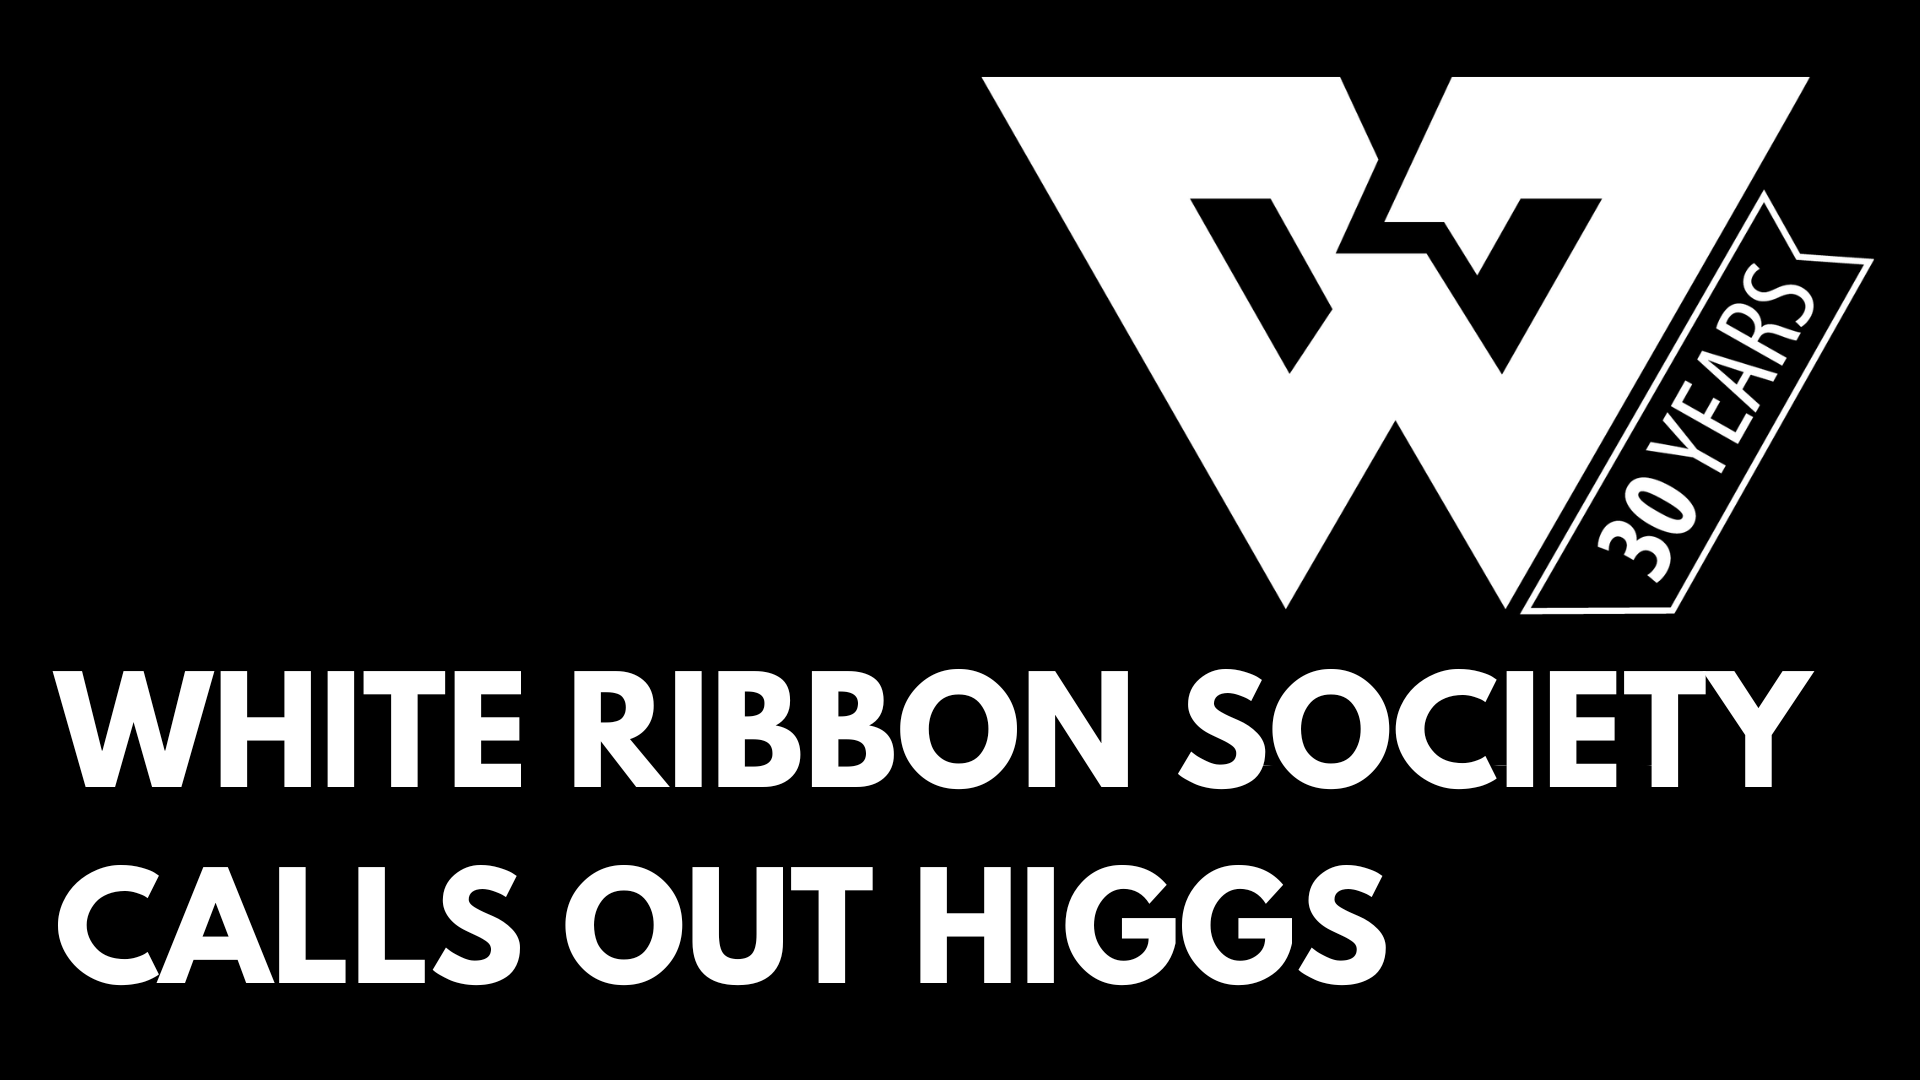 white text on black background "WHITE RIBBON SOCIETY CALLS OUT HIGGS" upper right corner has White Ribbon logo, a large white W with a banner saying "30 YEARS"